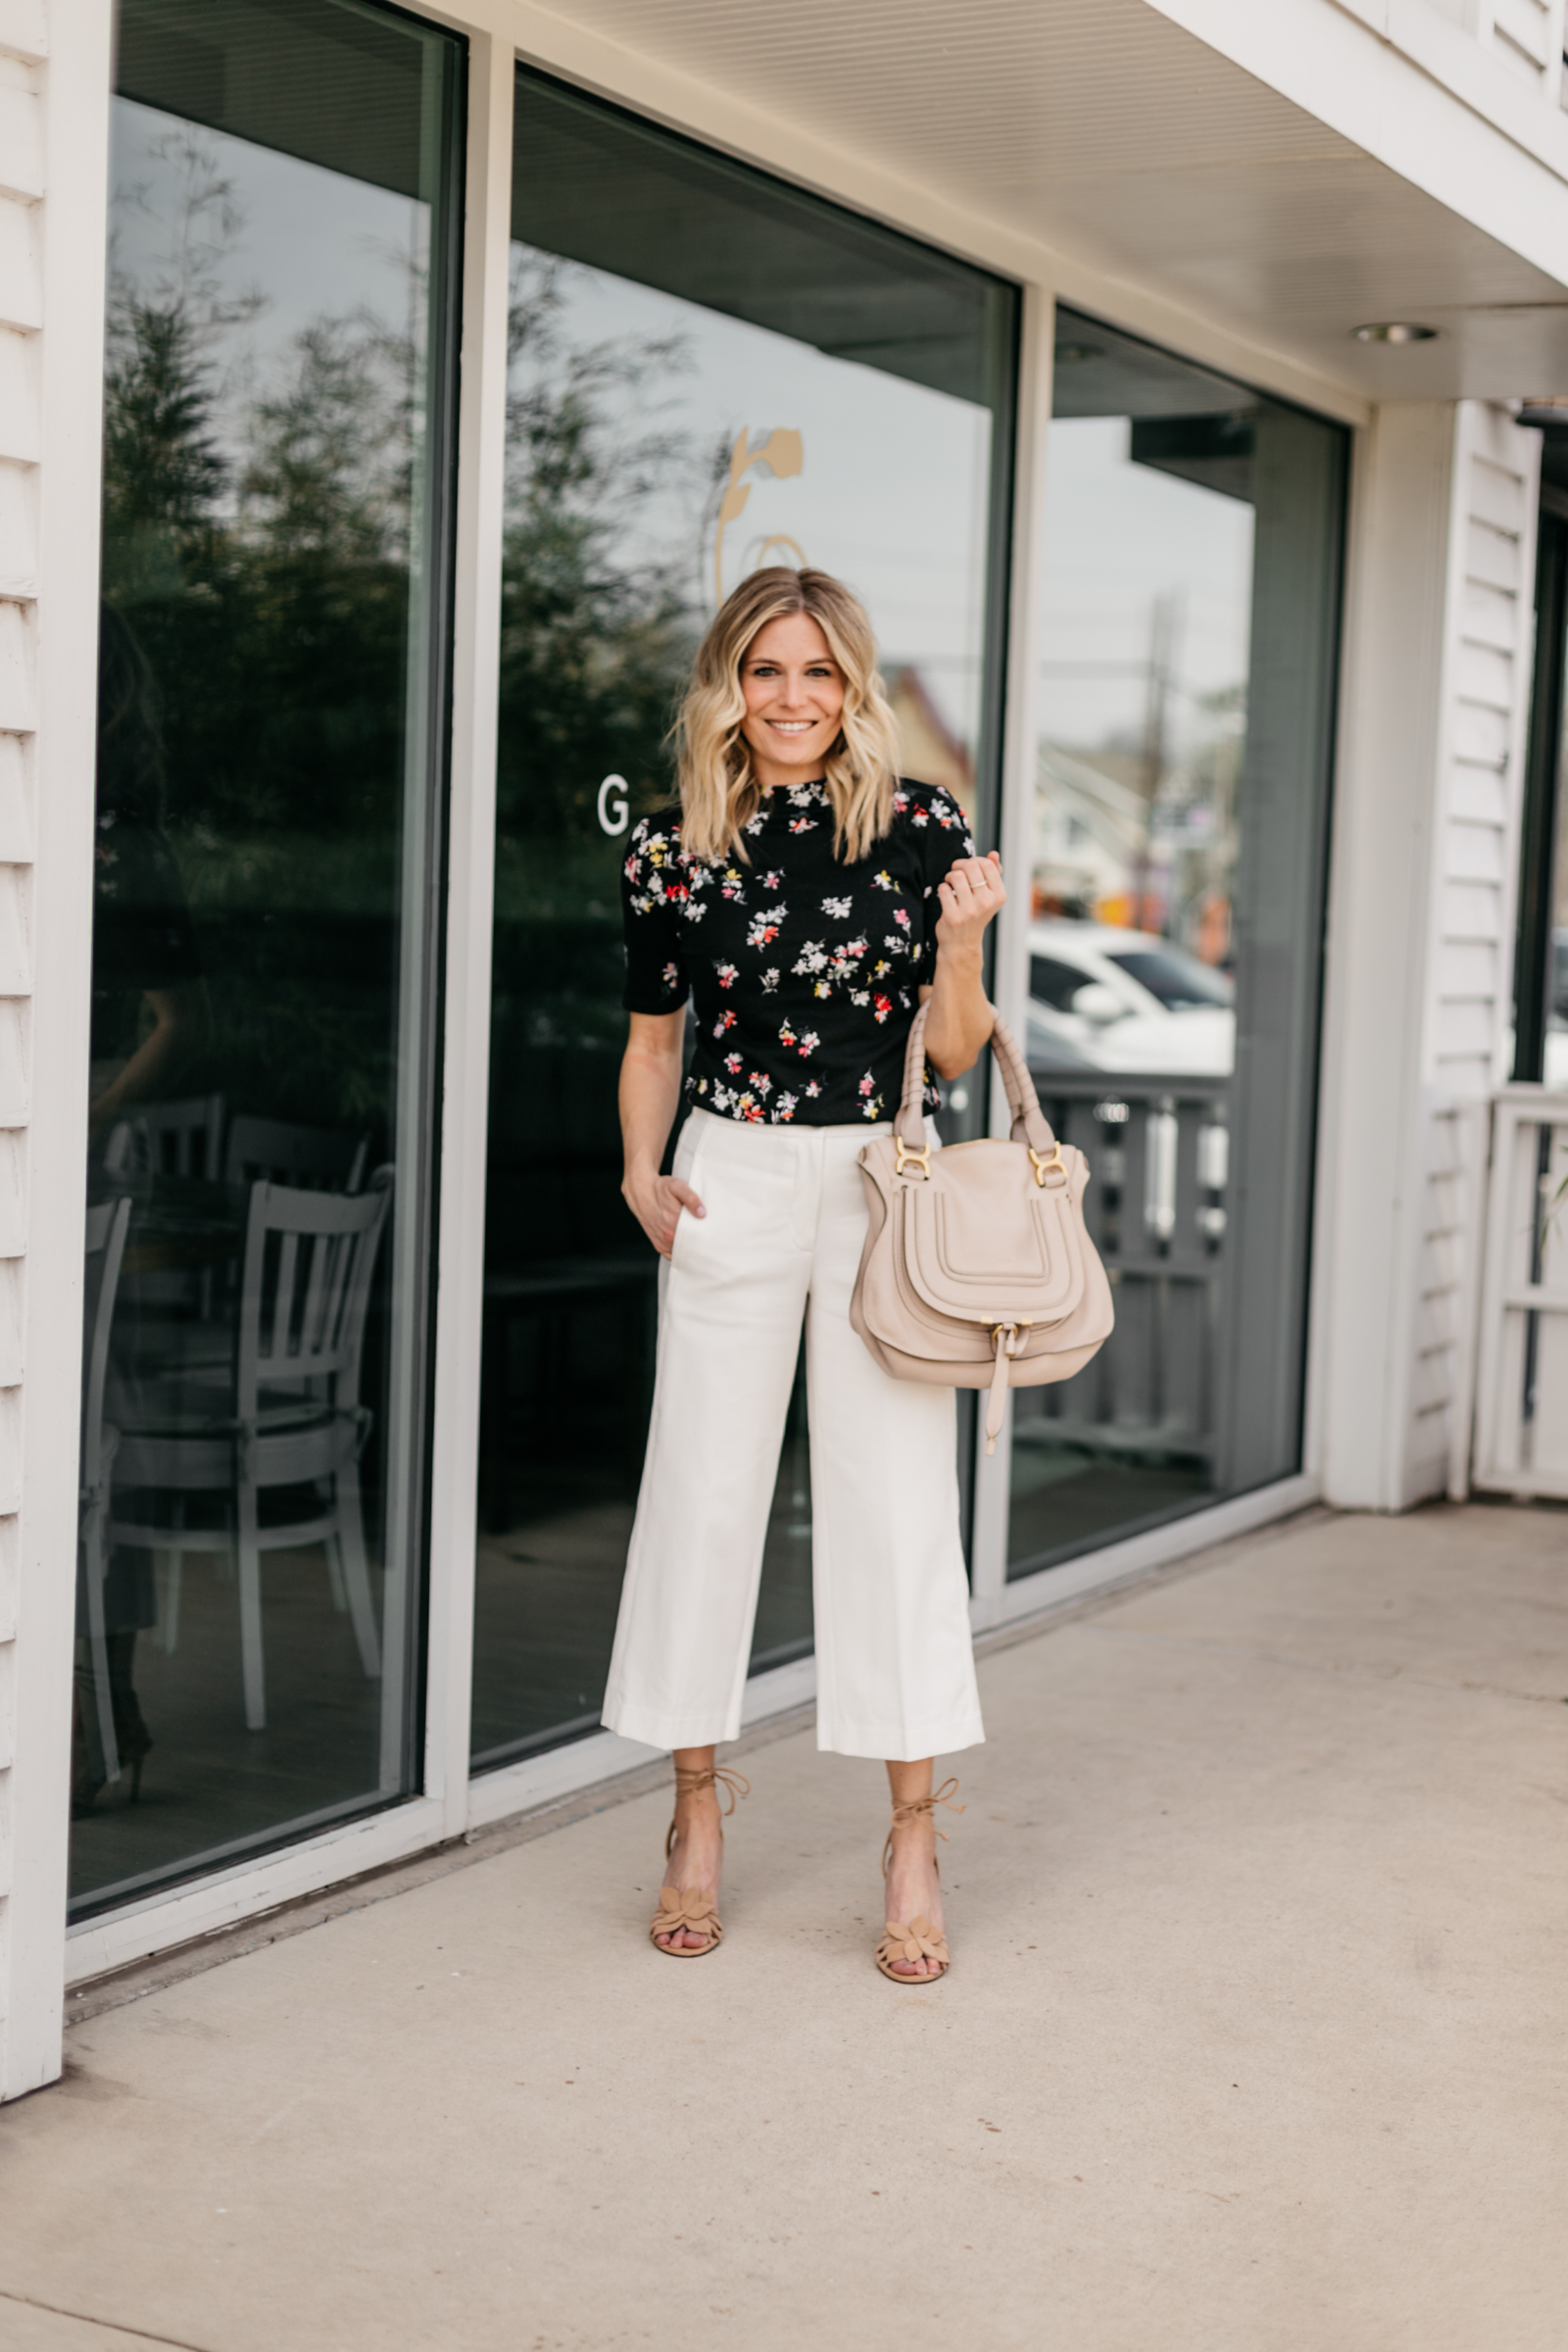 One Small Blonde is featuring a Floral Mock Neck Top and The Wide Leg Marina Pant from Ann Taylor